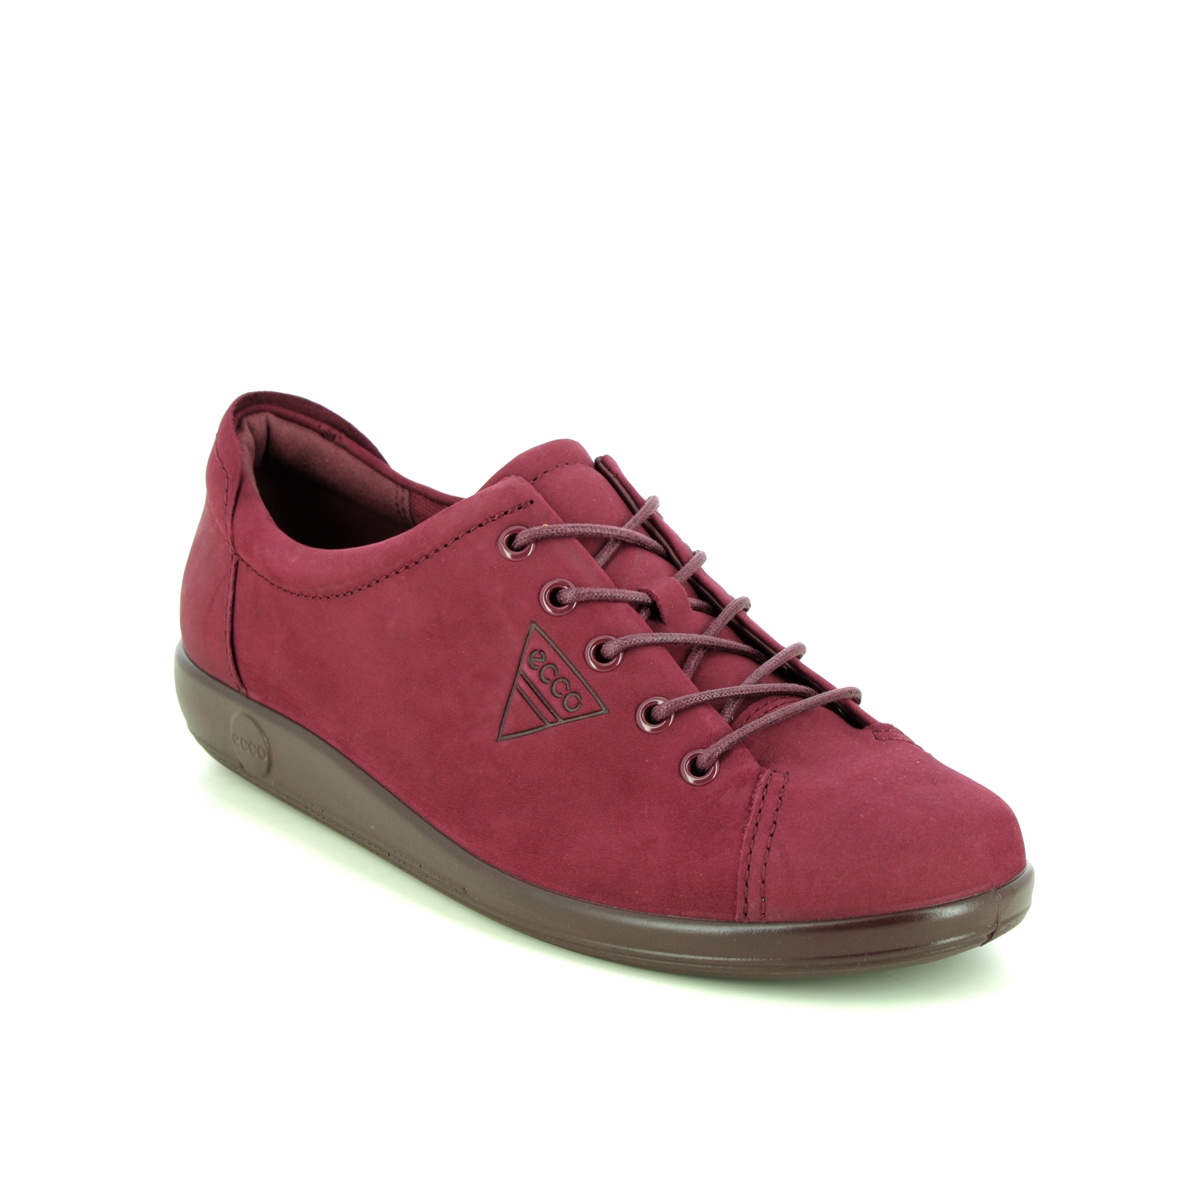 ECCO Soft 2.0 Plum Womens lacing shoes 206503-02237 in a Plain Leather in Size 38